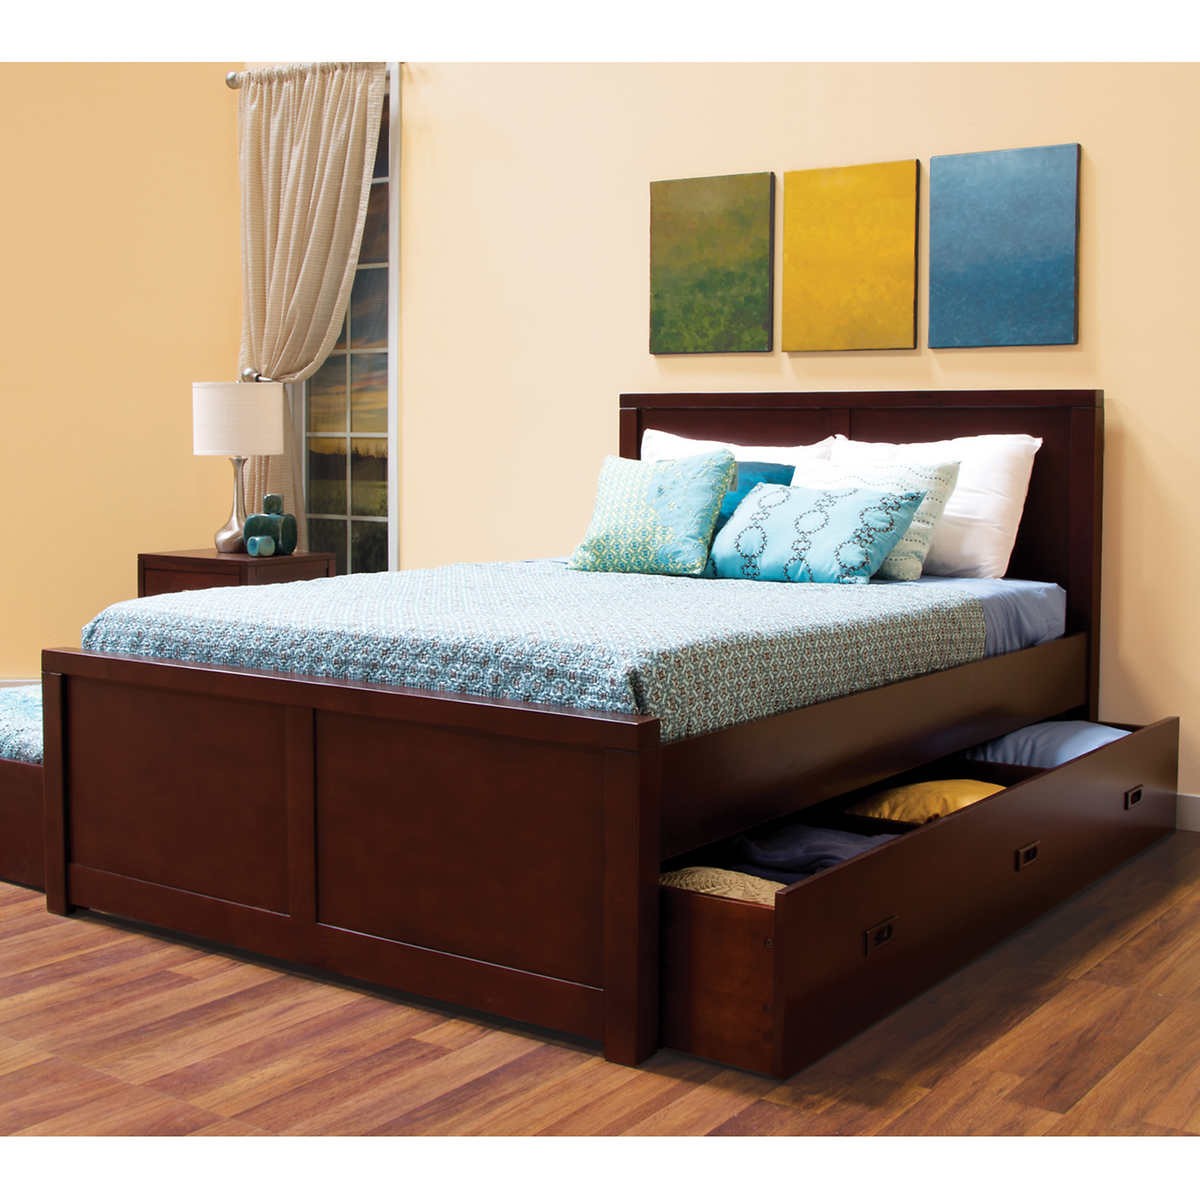 Full size trundle bed bachelor pad living room ideas for